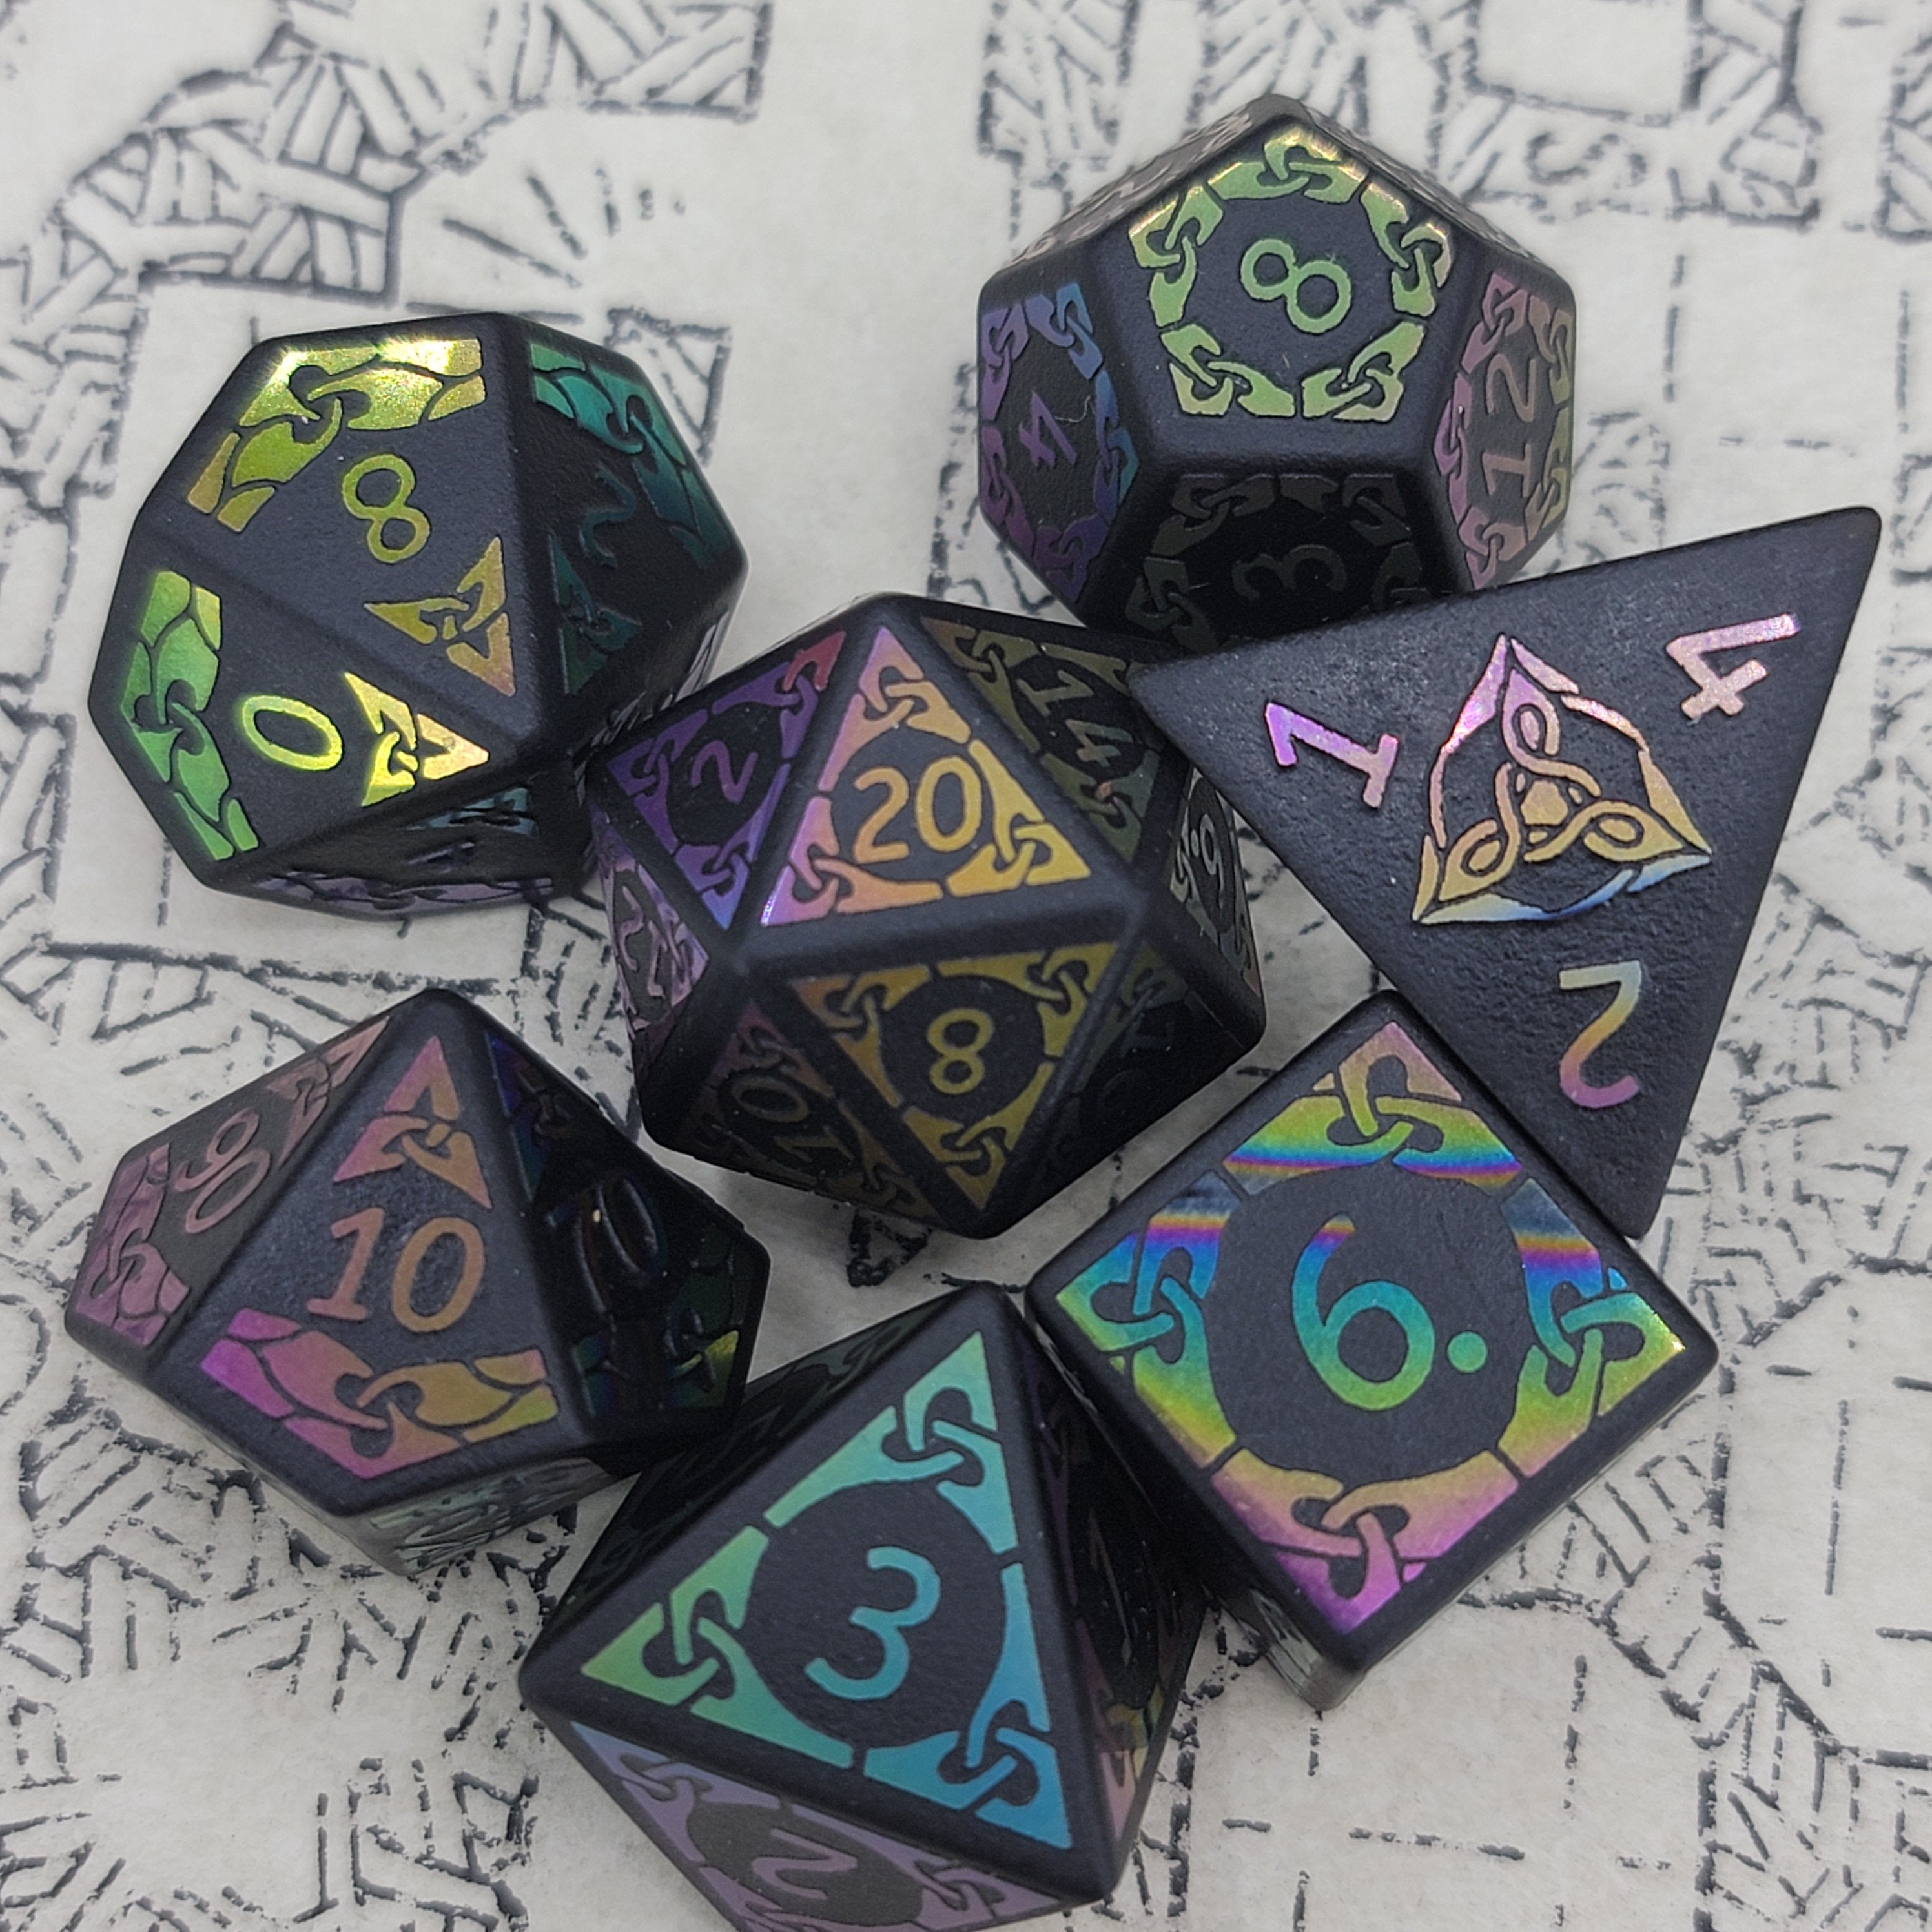 Obsidian Bifrost Stone Dice Set| RPG Dice | Polyhedral Dice Set | Dungeons & Dragons | DnD Dice Set | Metal Dice Set | Stone Dice Set